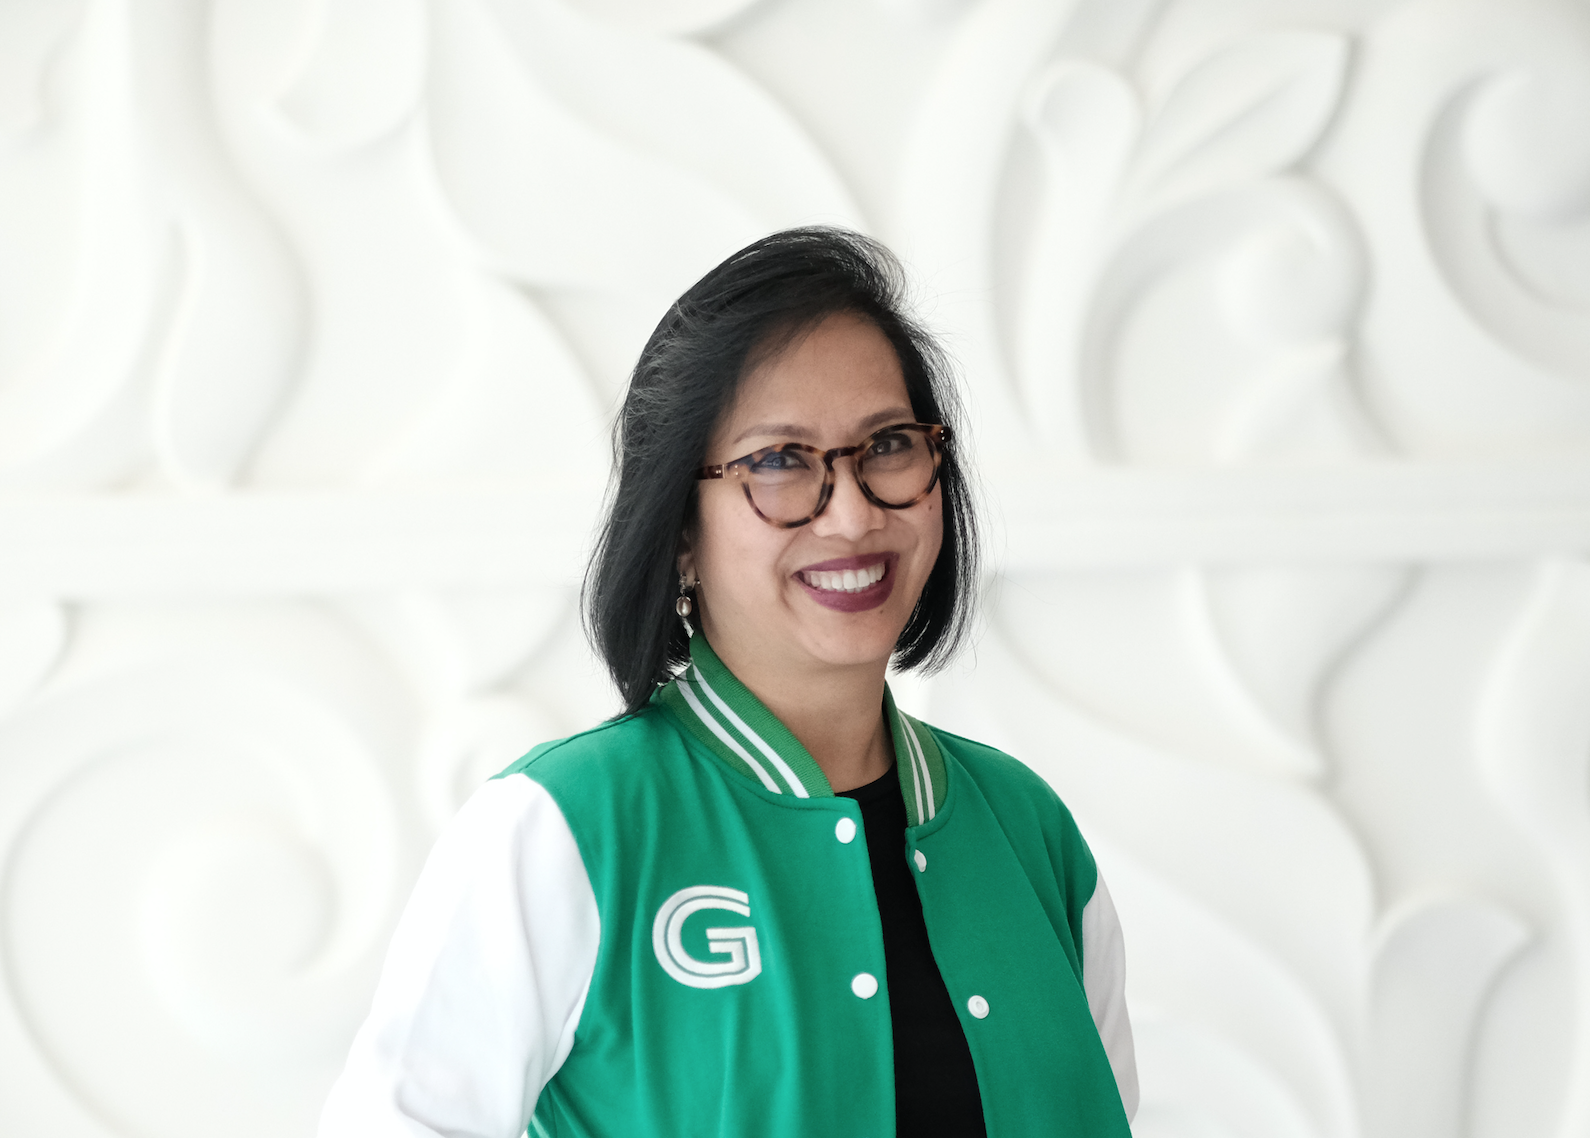 GrabKios and GrabExpress among the main growth verticals for Grab, says Indonesia country director